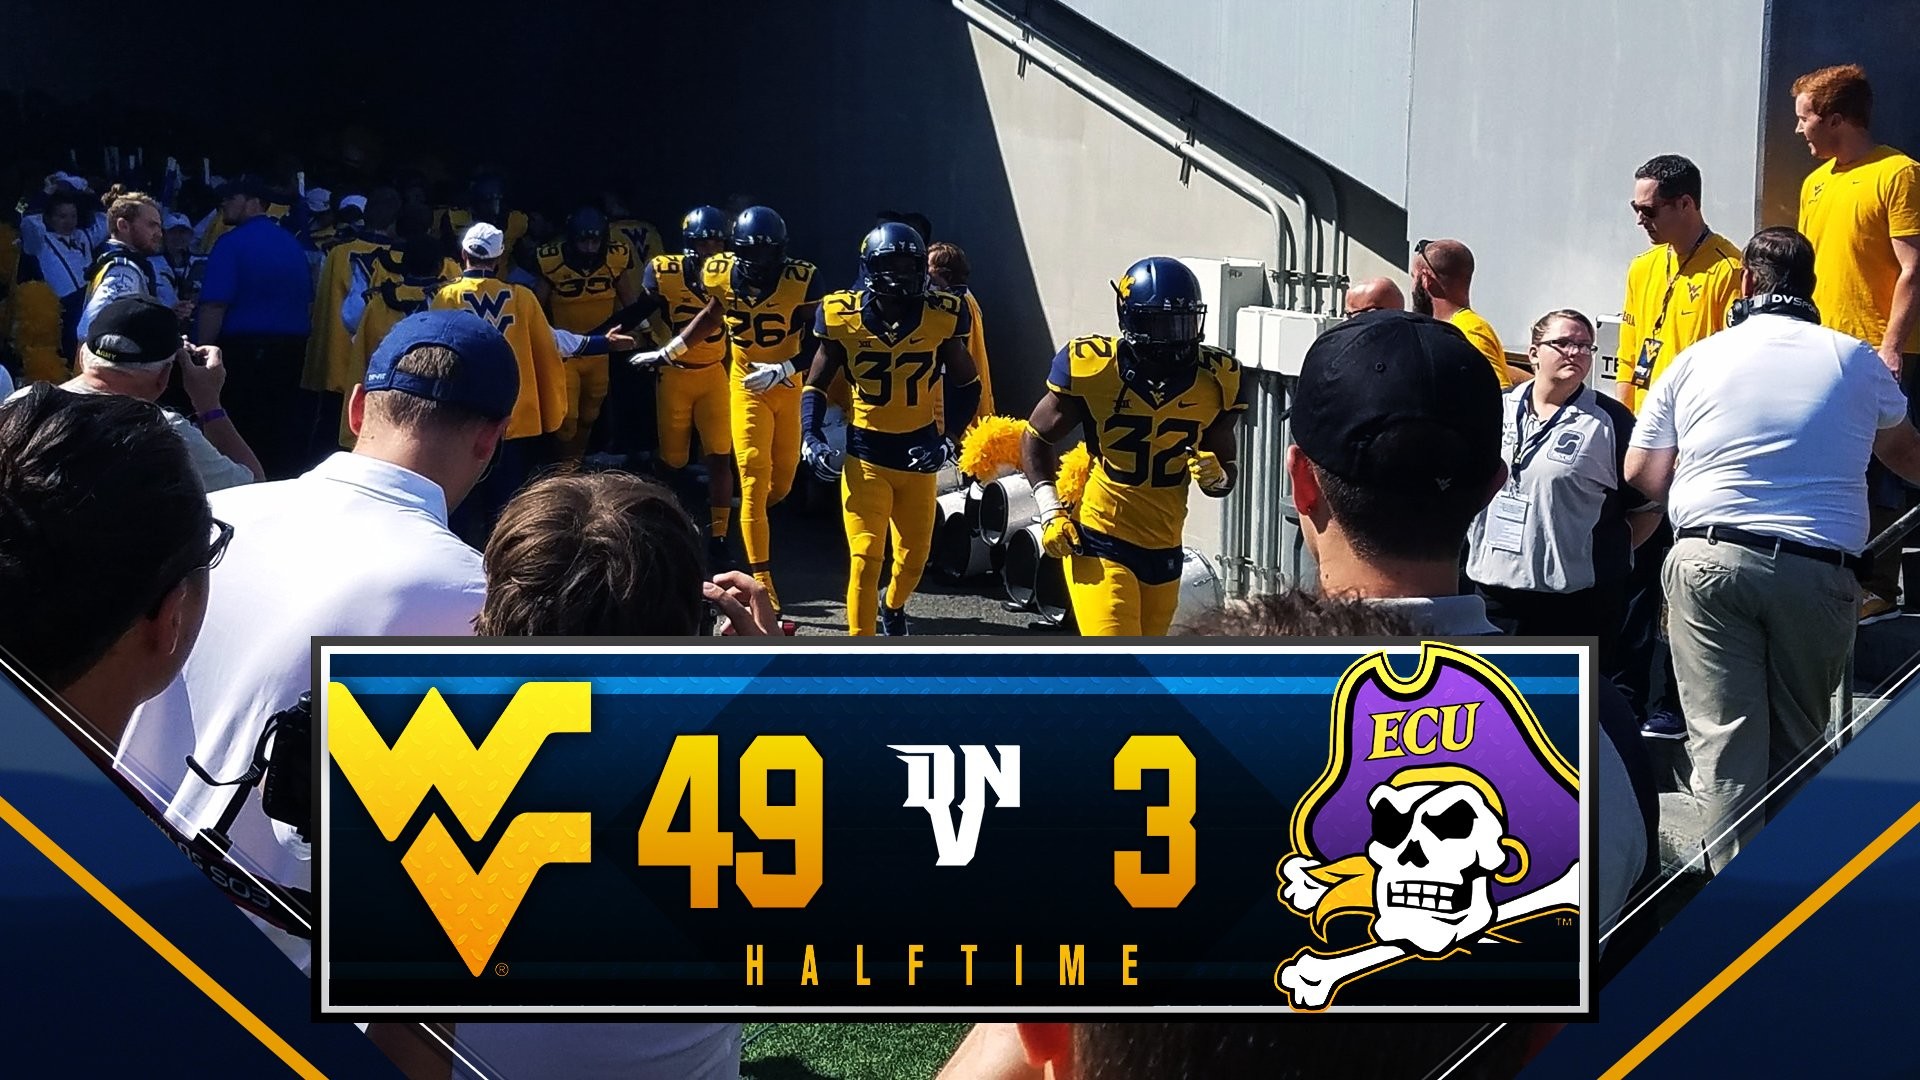 1920x1080 The Mountaineers received the opening kickoff to start the game and in the  opening drive, West Virginia would march down the field 75 yards in 2  minutes and ...